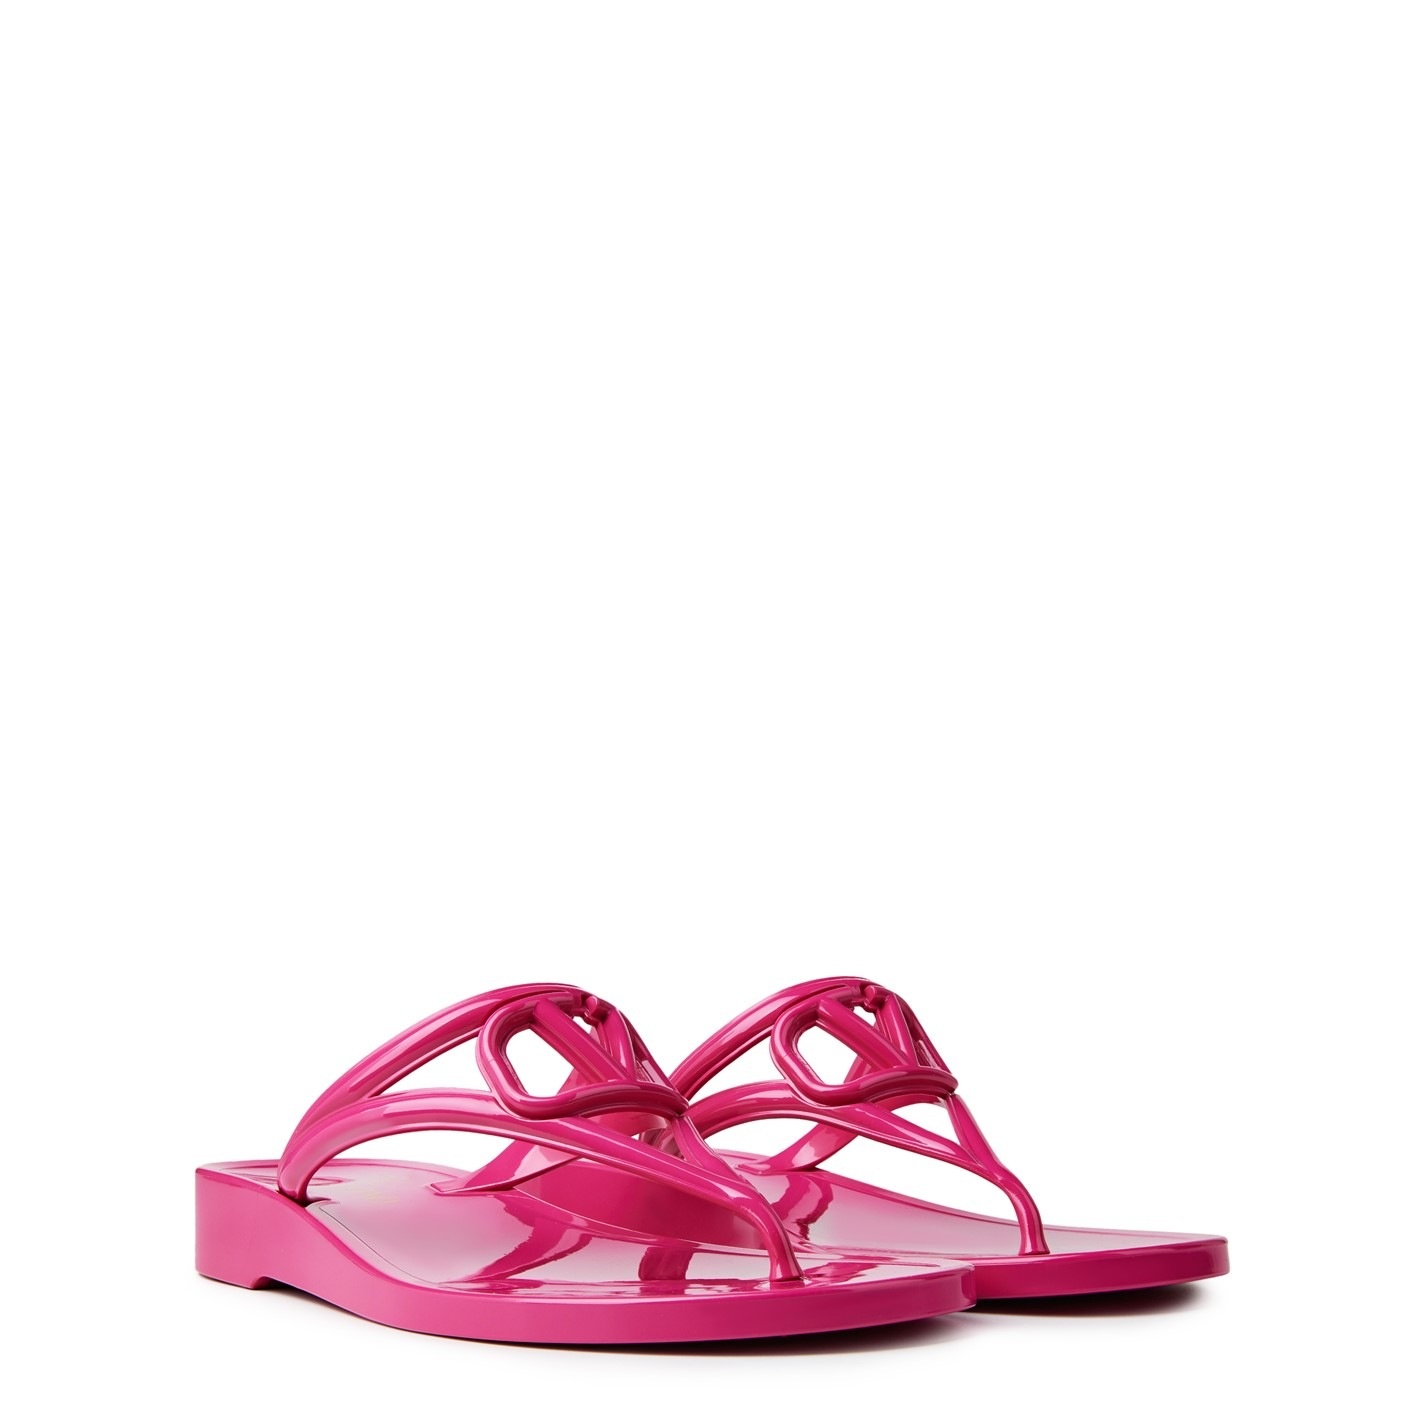 RUBBER THONG SANDALS - 4